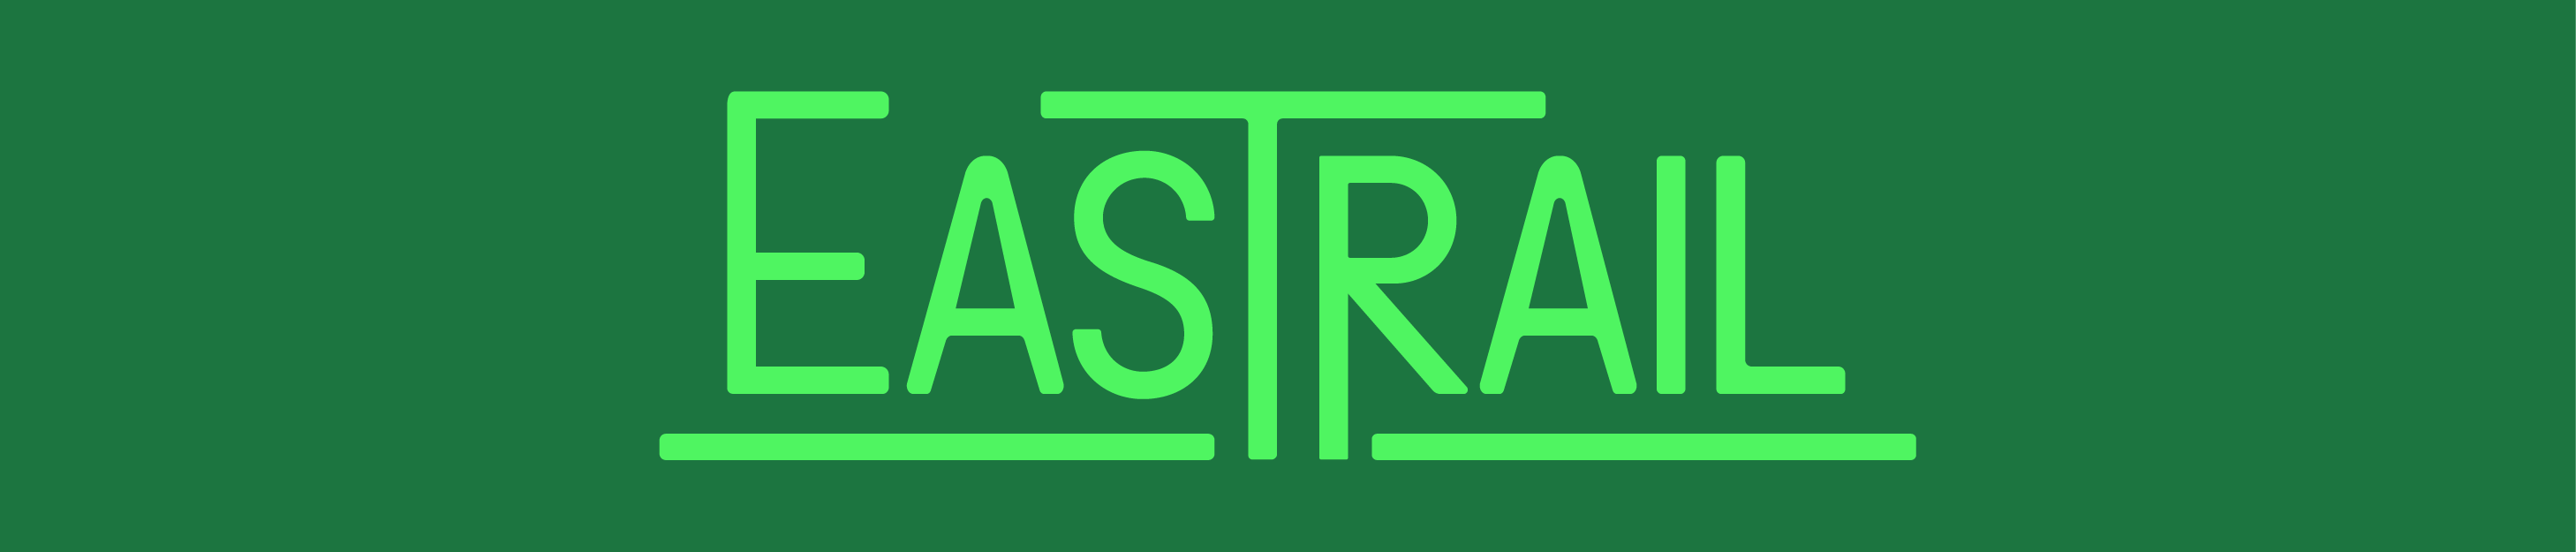 Light green stylized text reading "Eastrail" on a dark green background